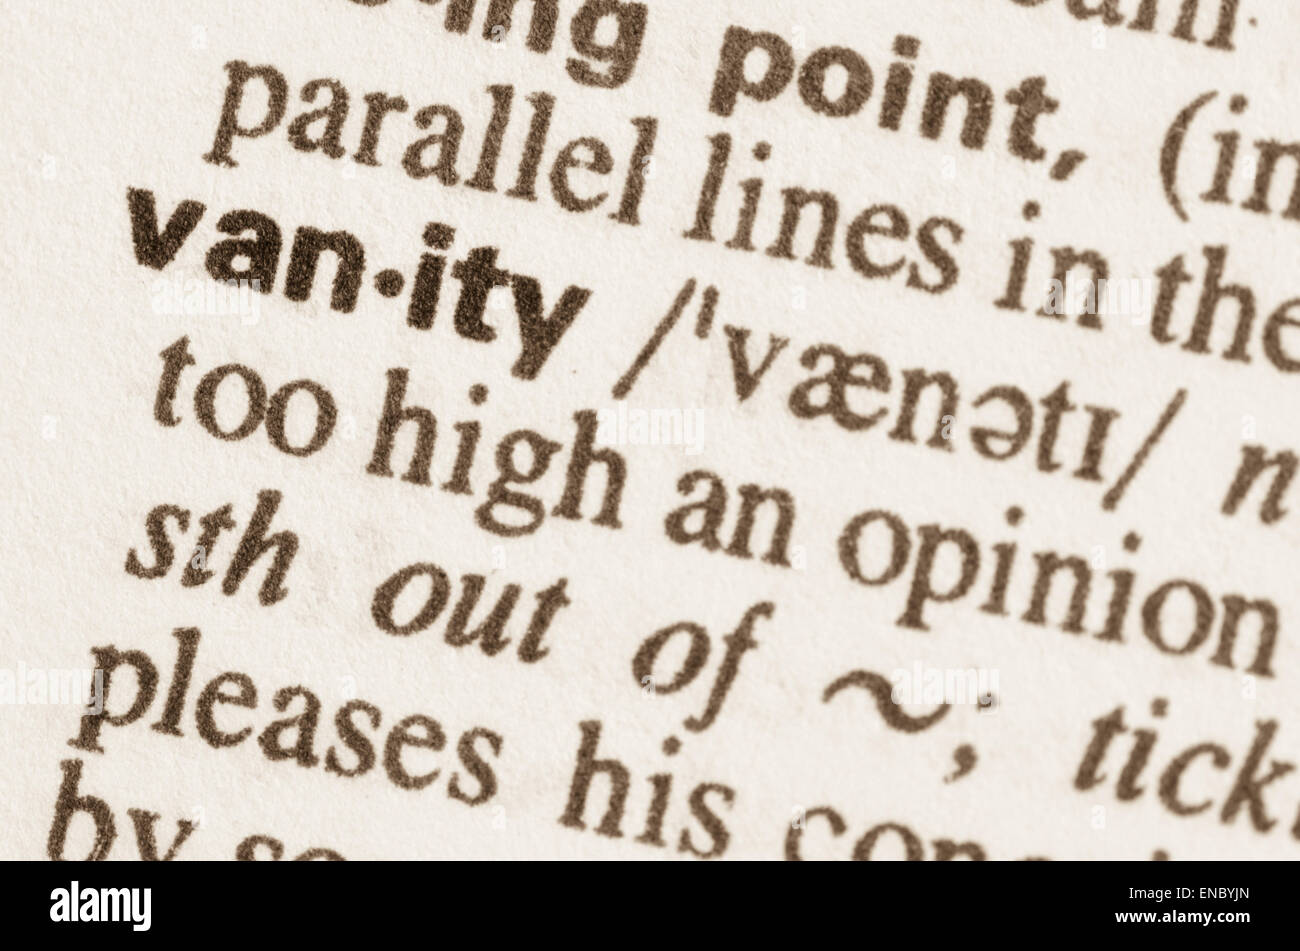 Definition of word vanity in dictionary Stock Photo - Alamy